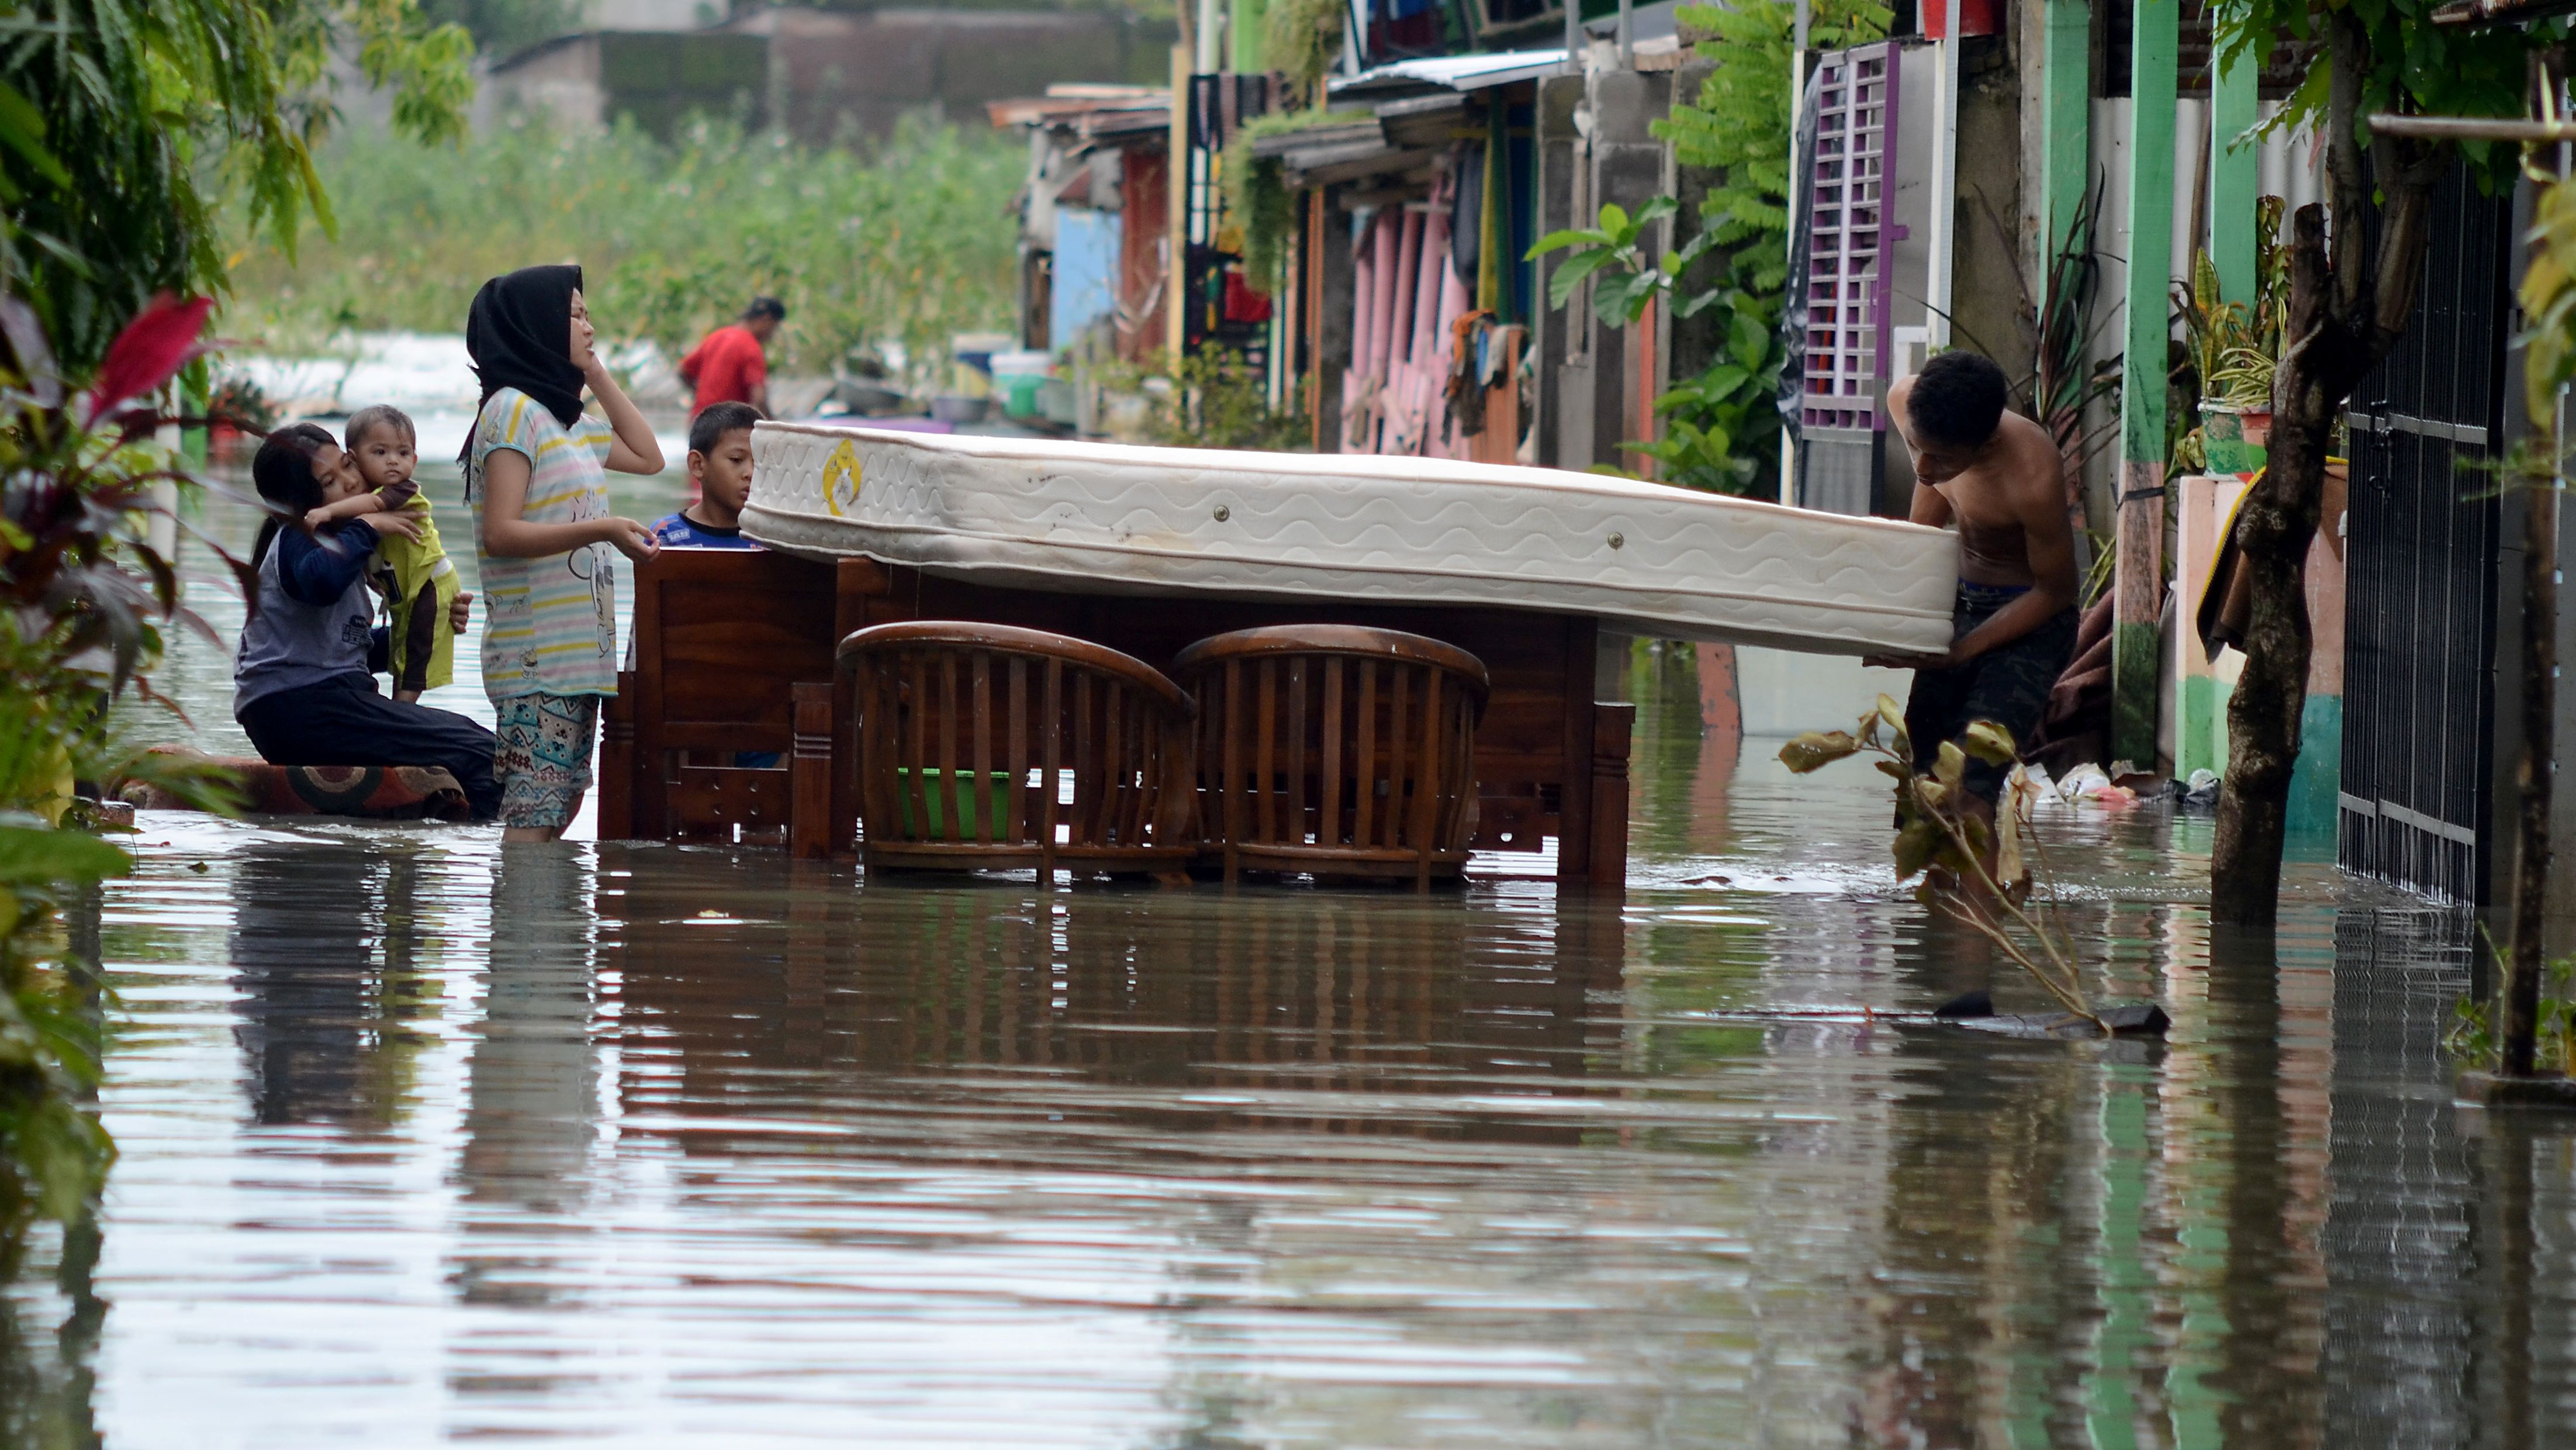 Residents clean up following floods in Makassar, Indonesia, on Friday, January 25.